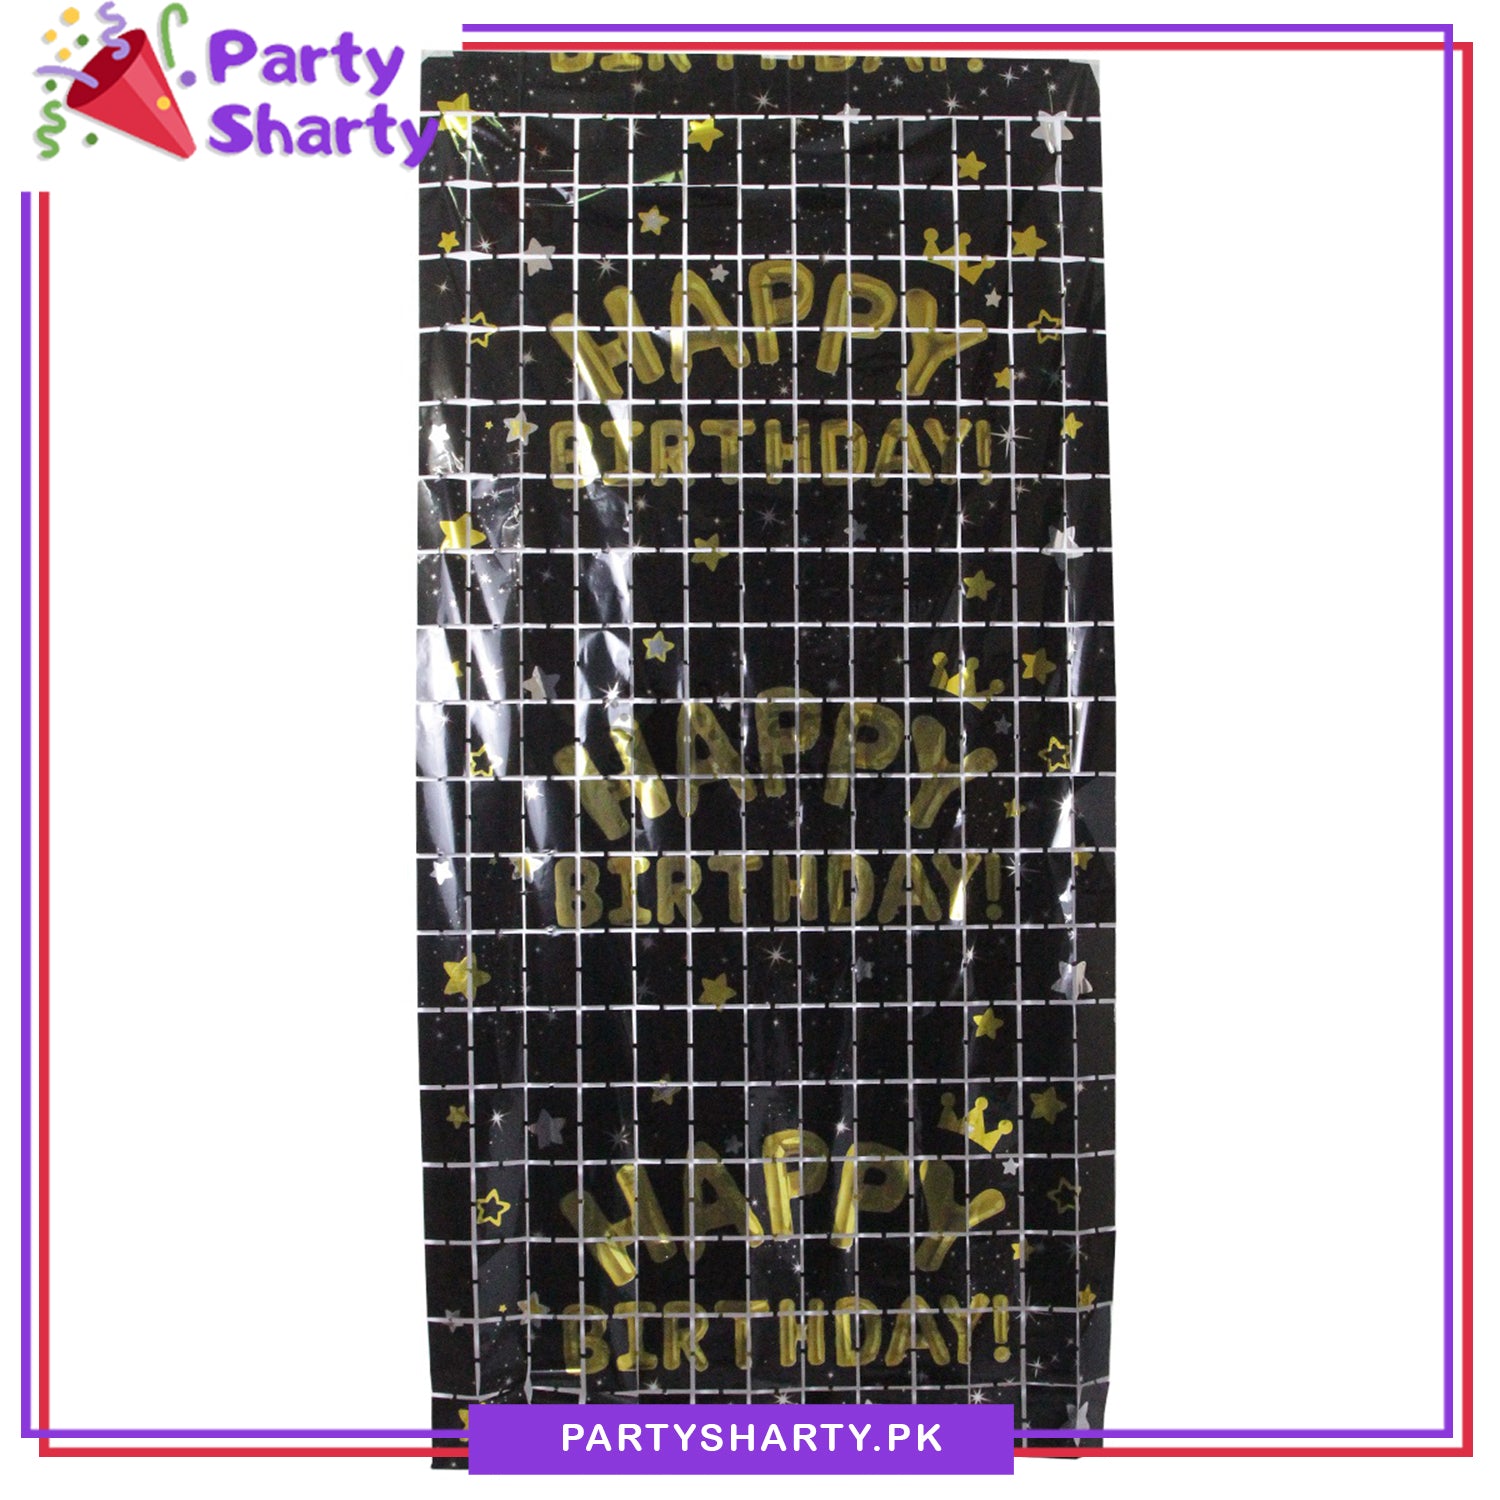 Happy Birthday Printed Fringes / Foil Curtains Best for Back Drop Wall Decoration for Birthday and Parties Celebration